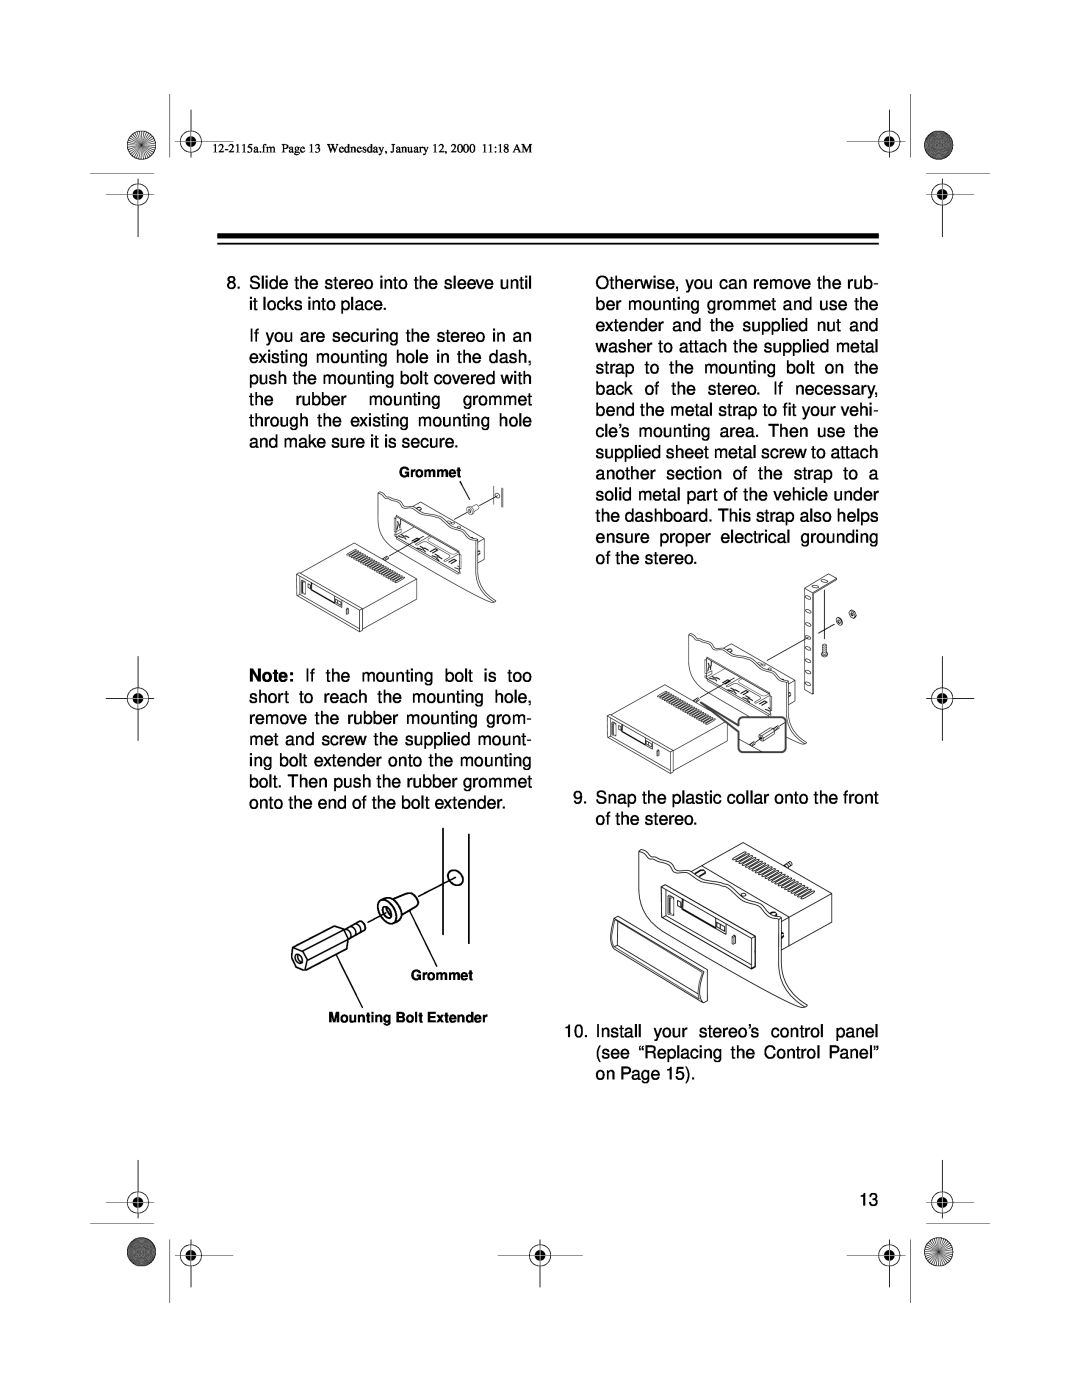 Radio Shack AM/FM Stereo Cassette owner manual Slide the stereo into the sleeve until it locks into place 